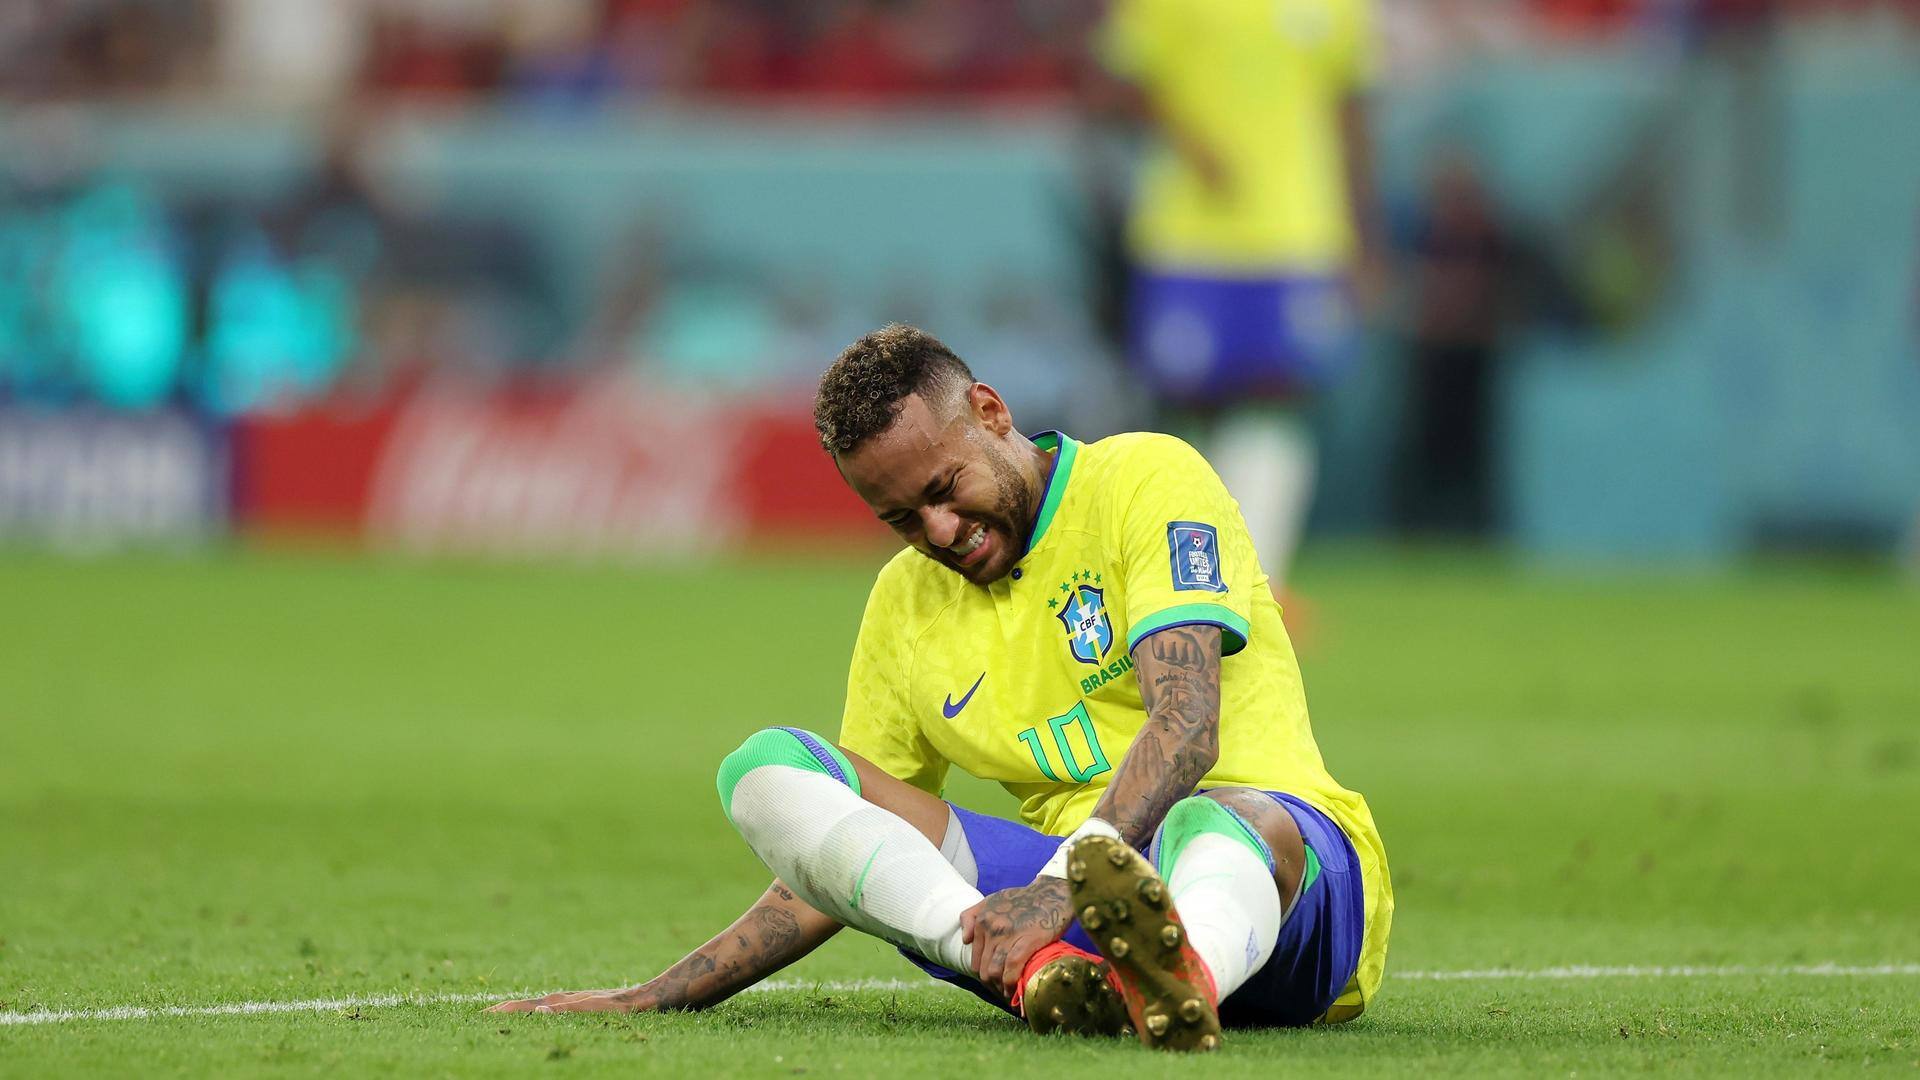 PSG's Neymar to undergo ankle surgery: His tryst with injuries 